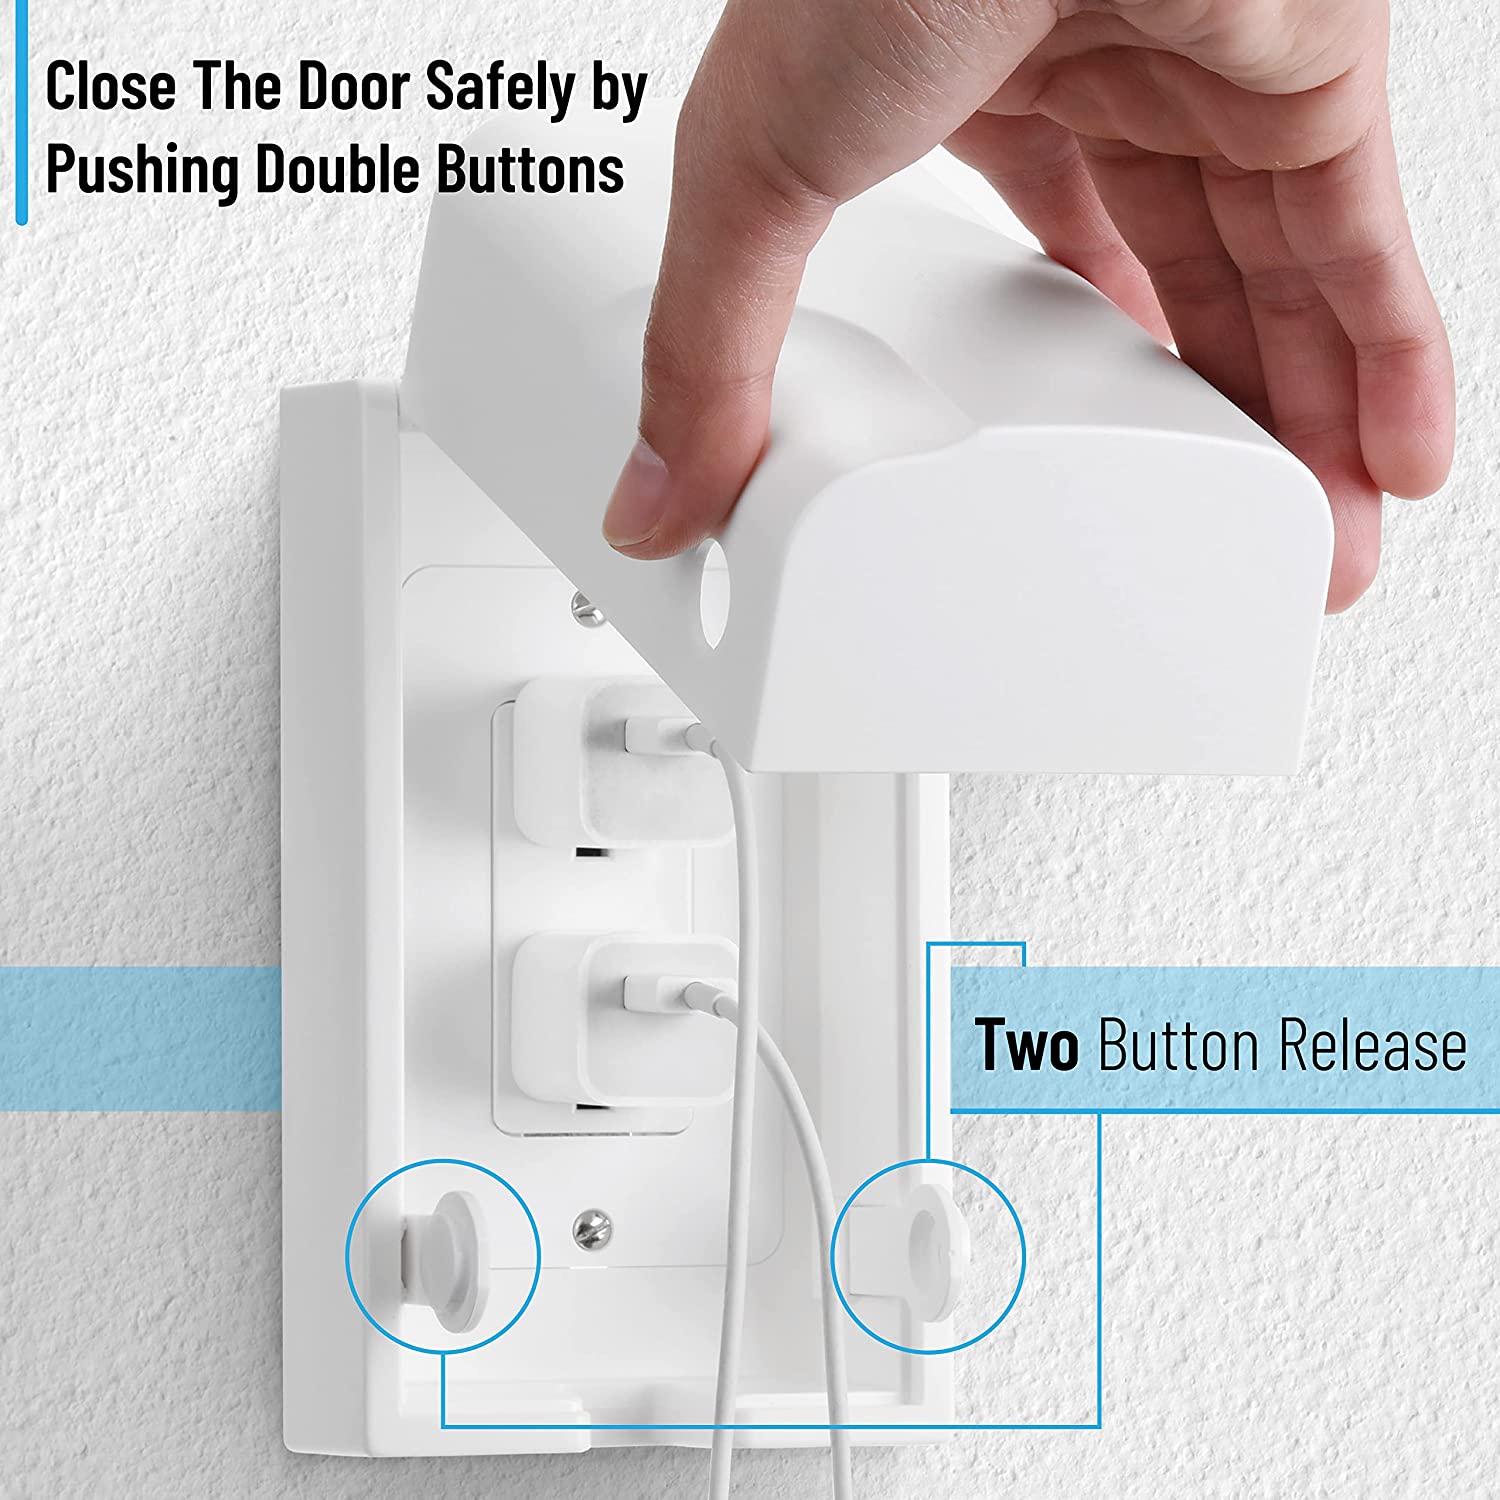 Outlet Box Cover Baby Proof Outlet Covers Outlet Covers Baby Proofing Plug Covers for Electrical Outlets Child Proof Outlet Cover Baby Safety Outlet Cover Box Bates Socket Covers for Outlets 